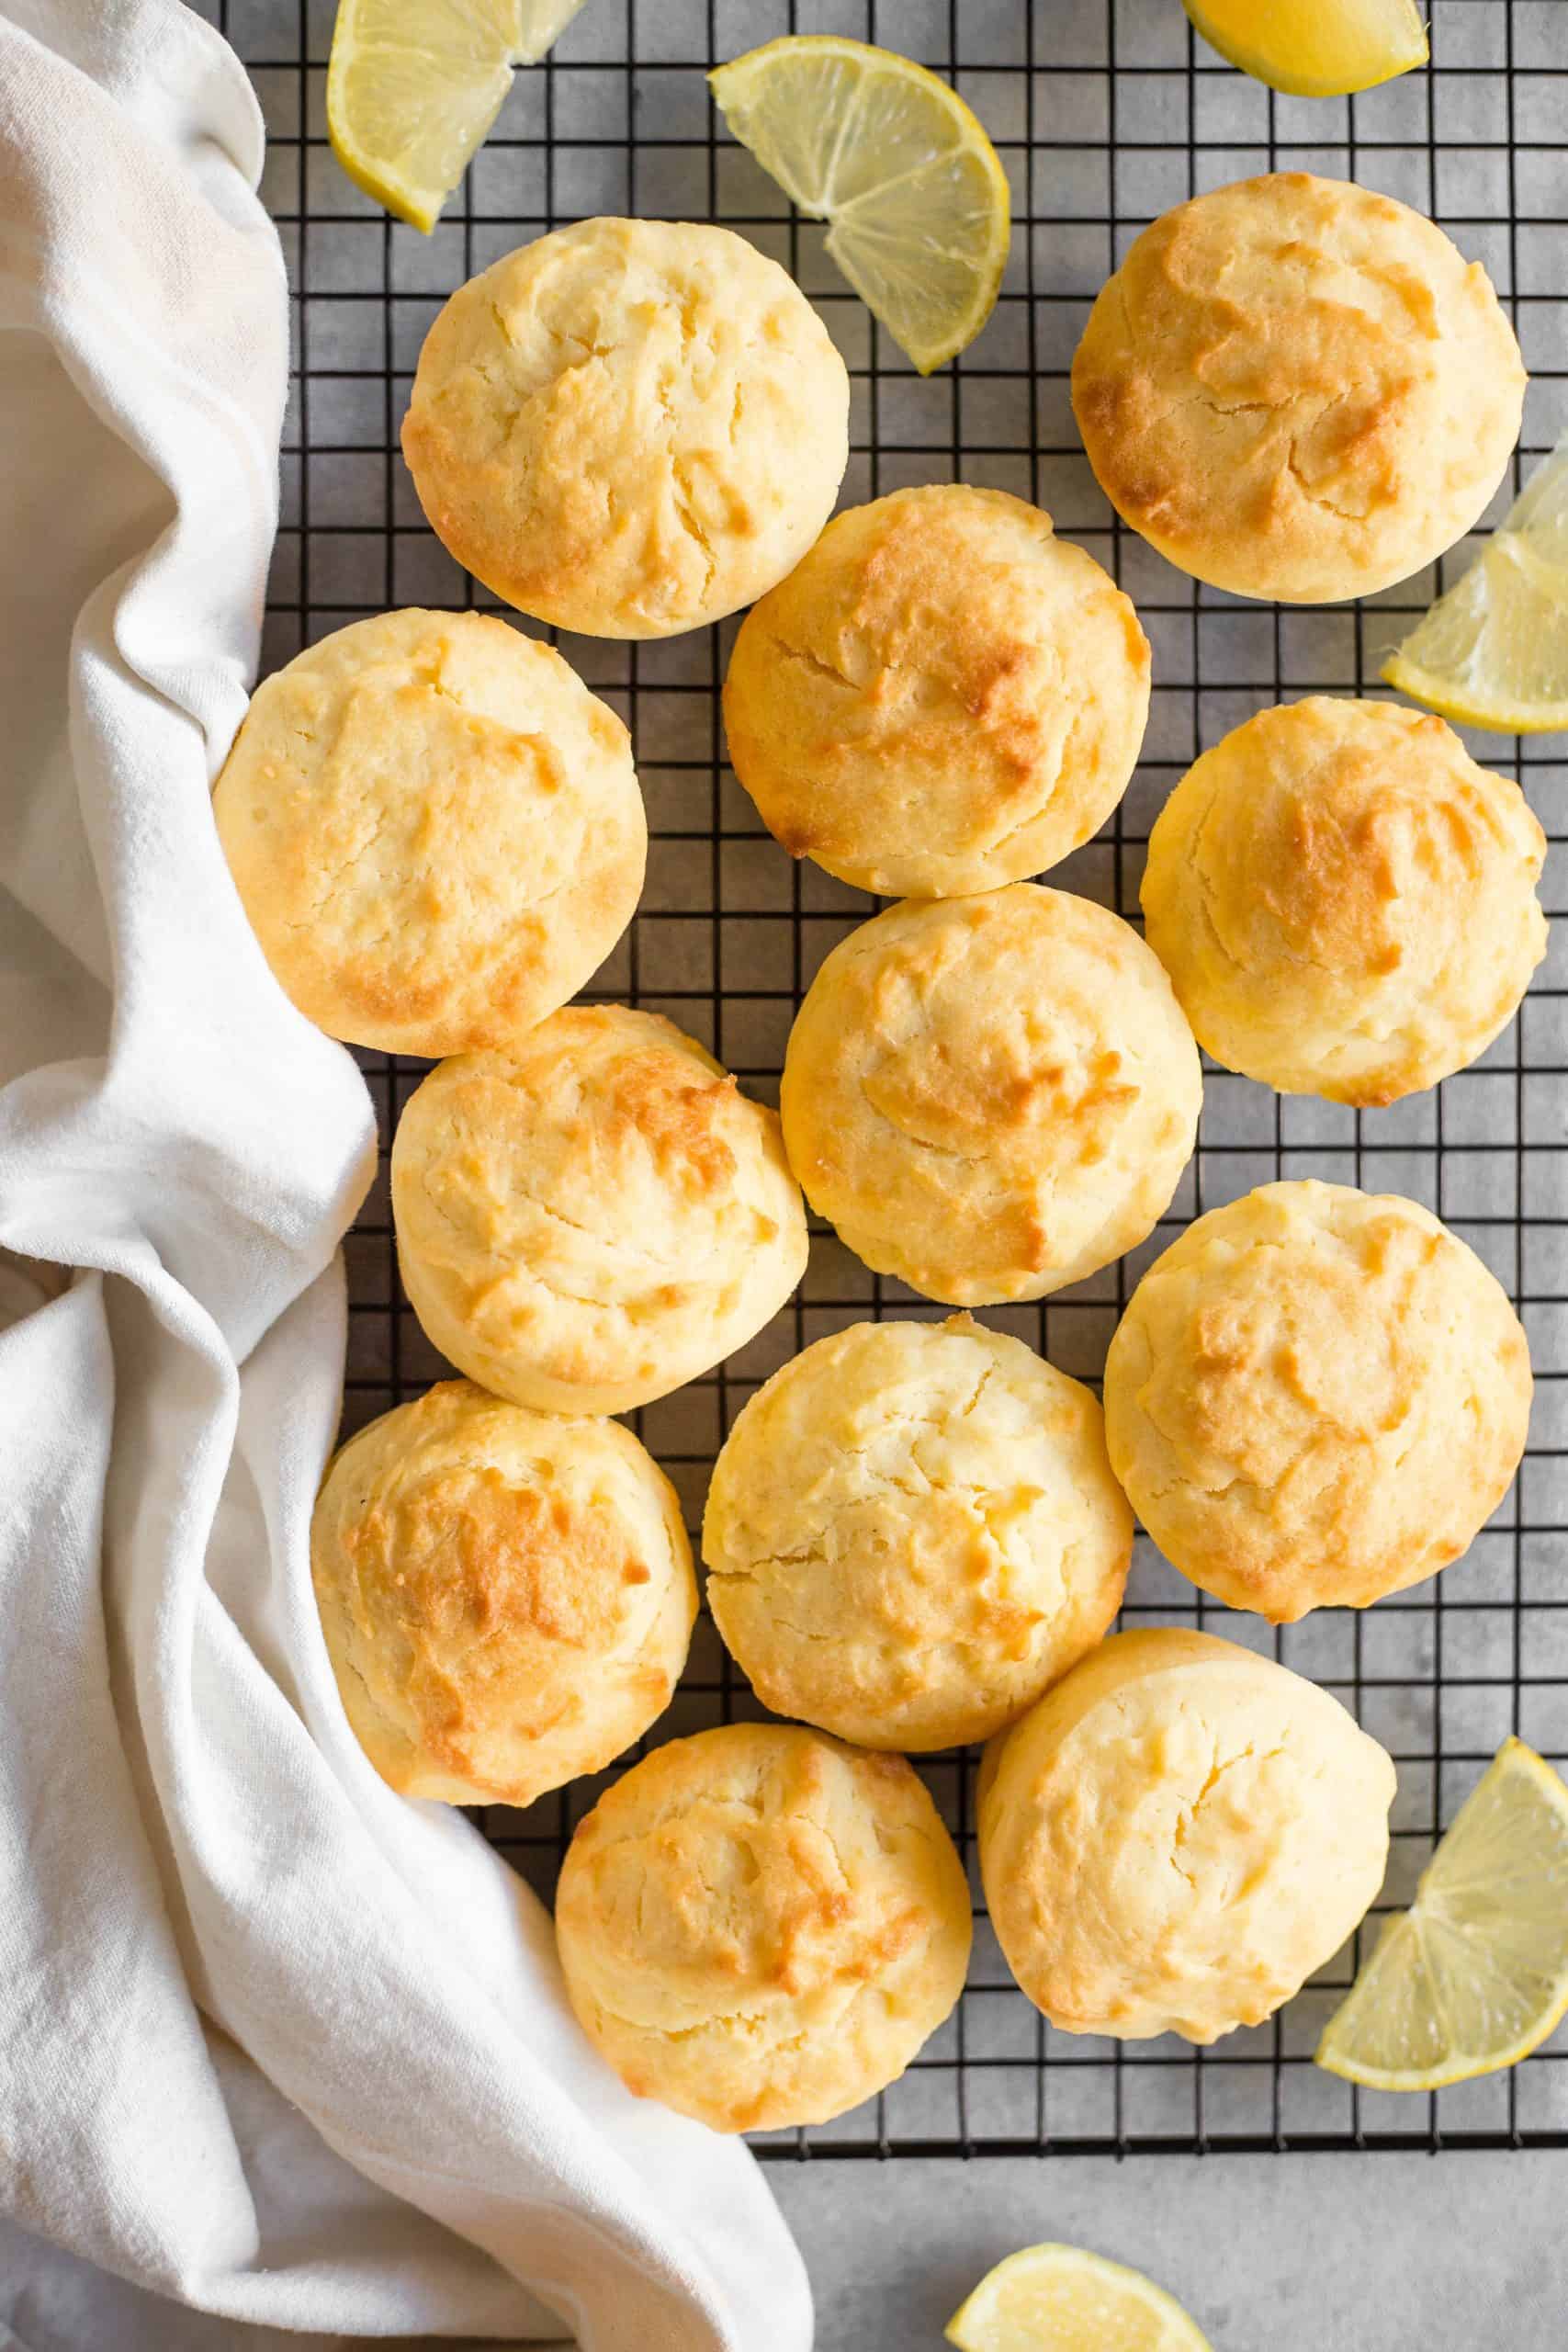 Gluten-free lemon muffins cooling on a wire rack.